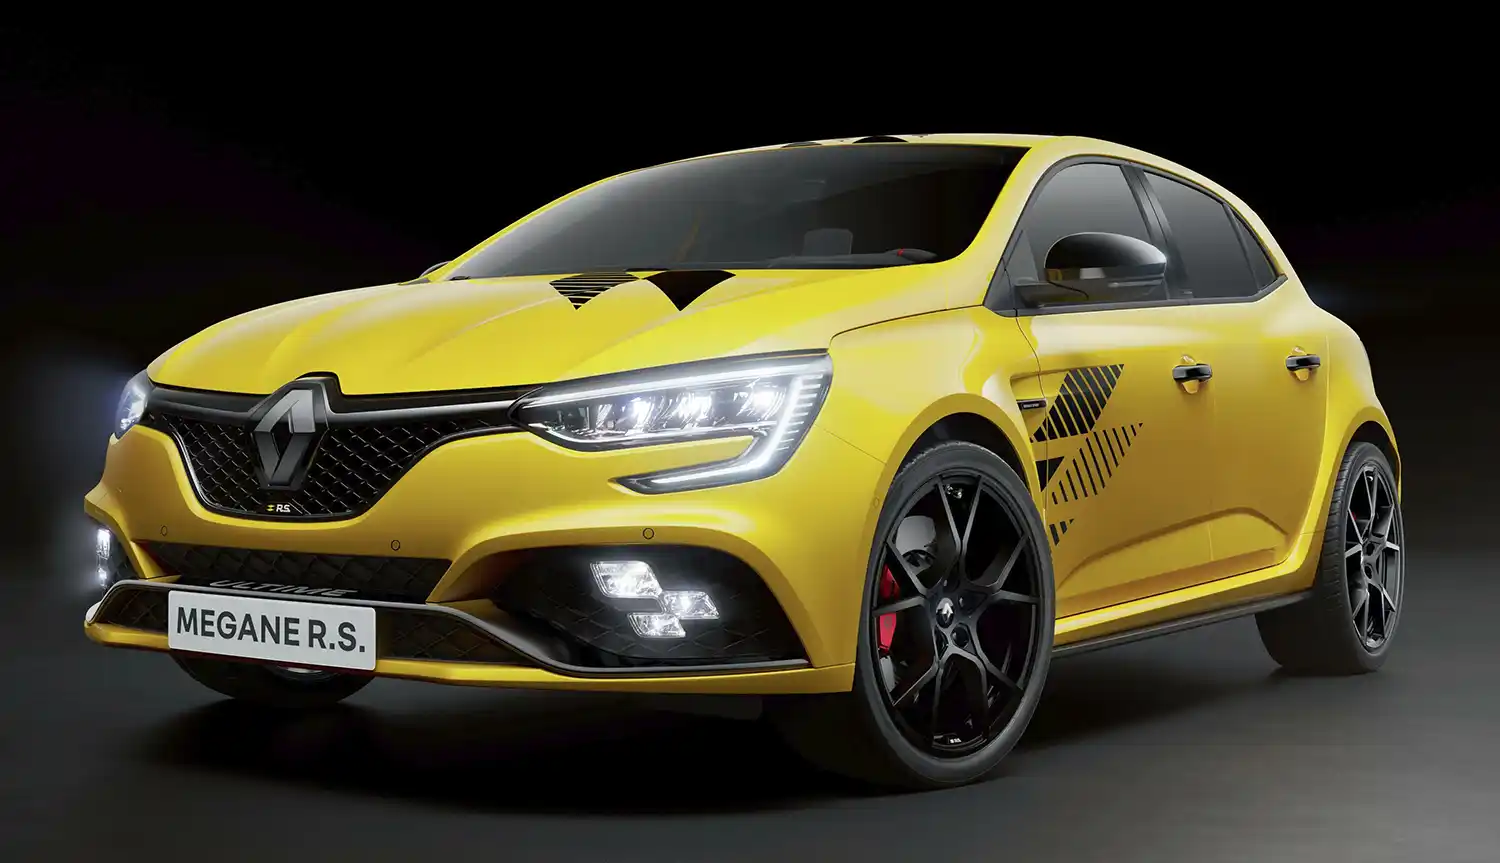 A look back at Renault Sport's iconic models - Renault Group